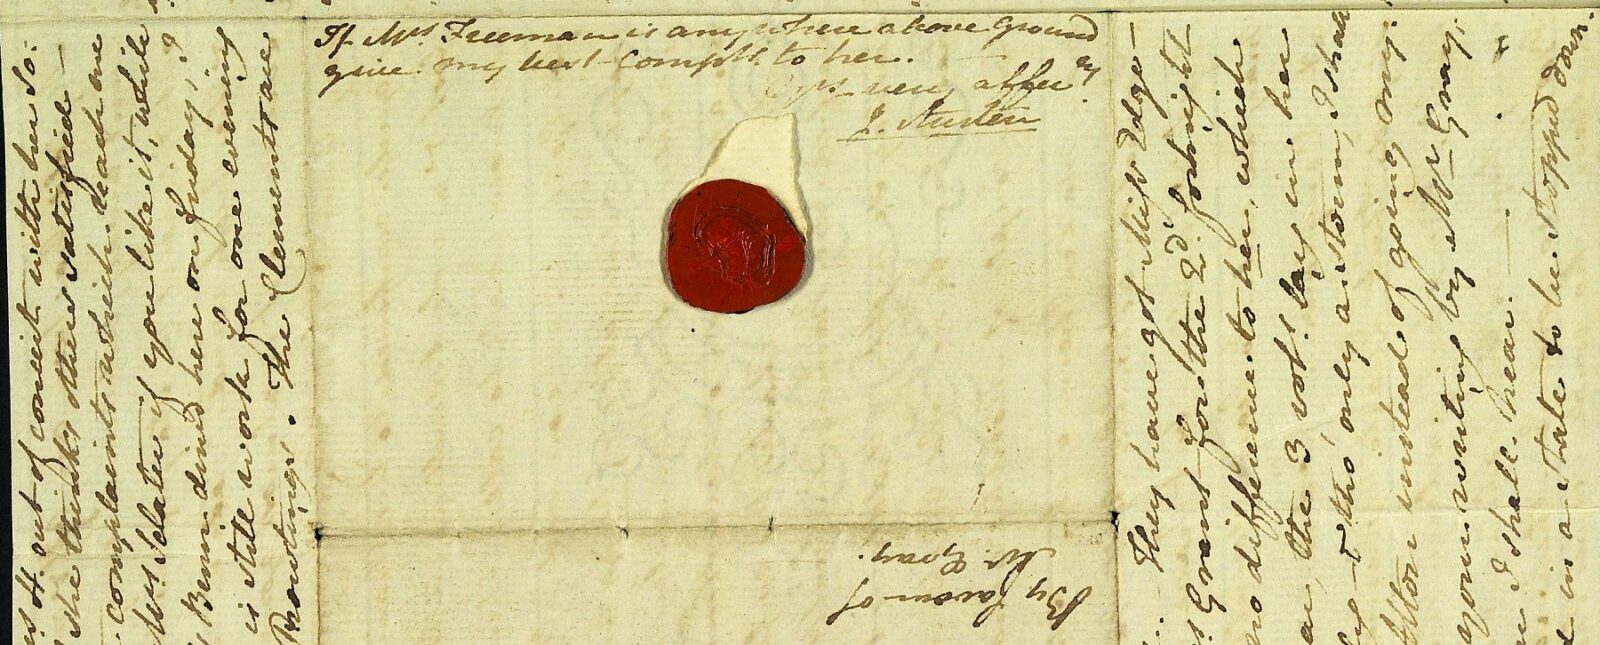 Letter from Jane Austen to Cassandra Austen, 9 February 1813. Close up of edge of the letter where the signature has been squeezed in just above the wax seal.